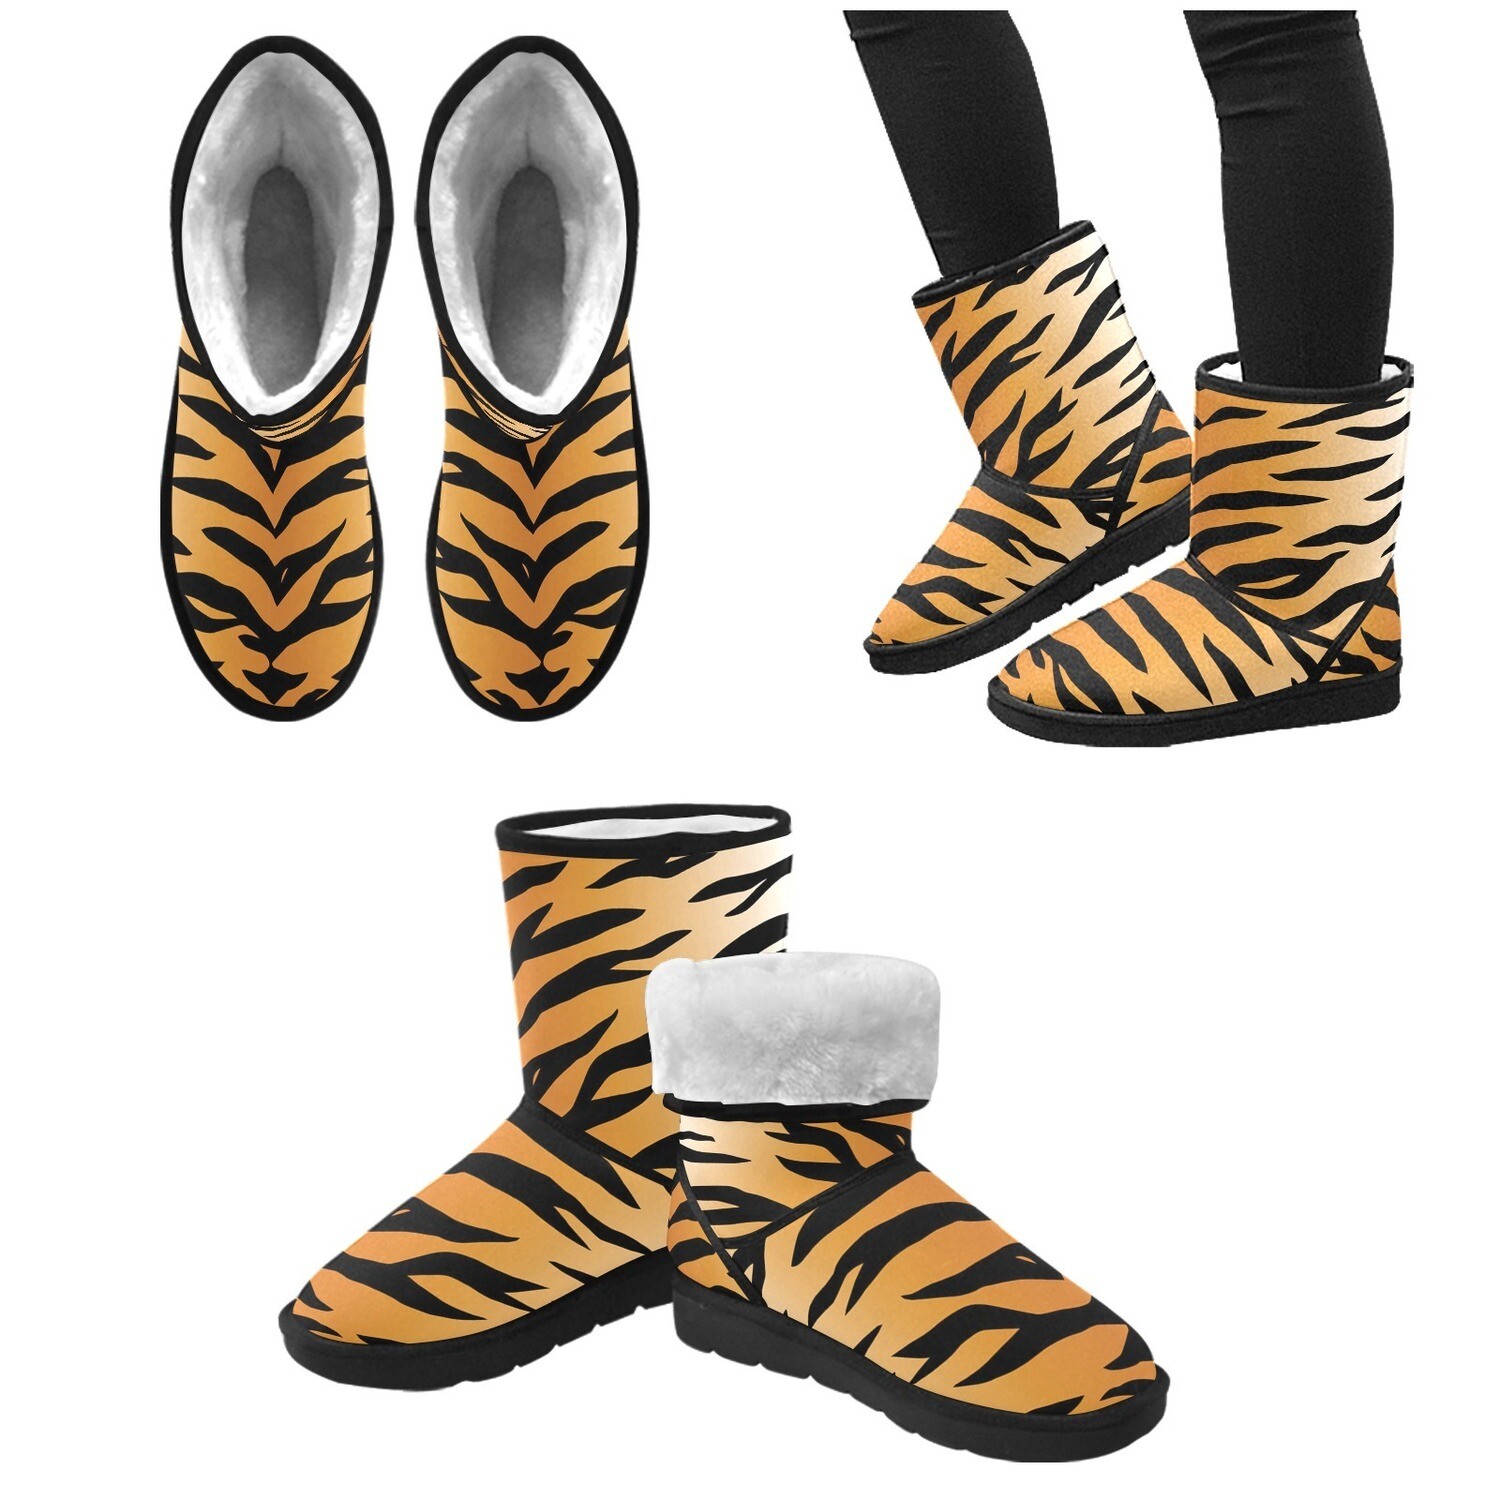 👸🏽👟❄️🐅 Snow Boots for women Tiger print, Animal's print Snow Boots, feline Snow Boots, Gift for kids, 9 sizes